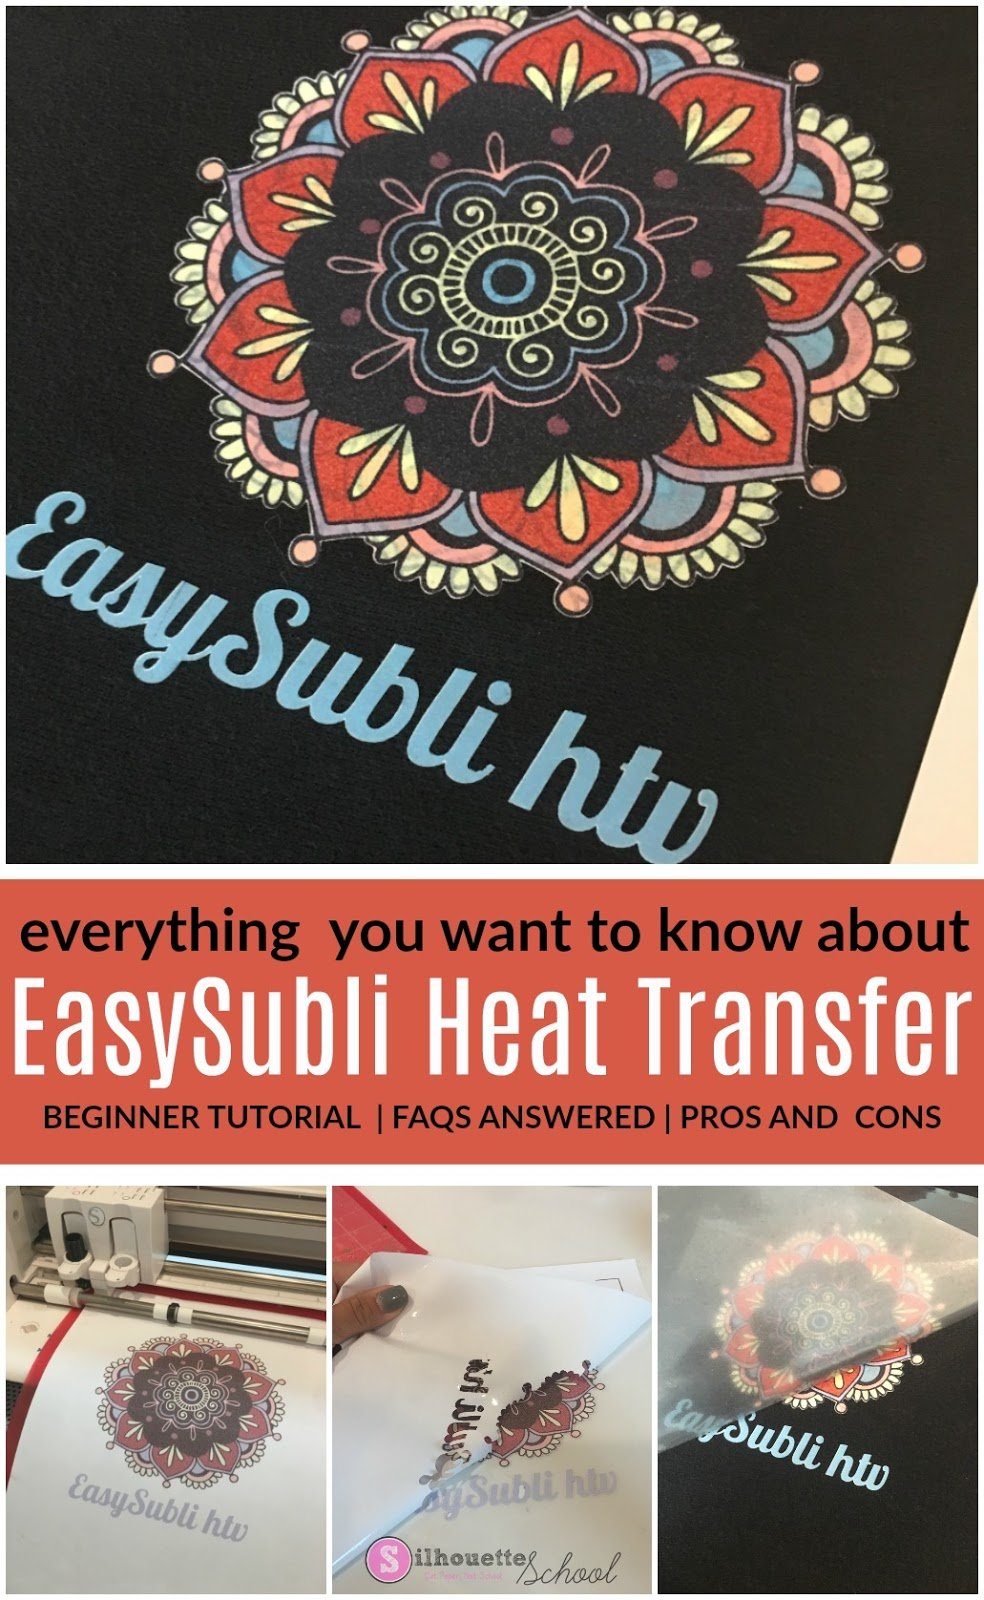 SISER EASYSUBLI HTV: EVERYTHING YOU WANT TO KNOW ABOUT SUBLIMATION